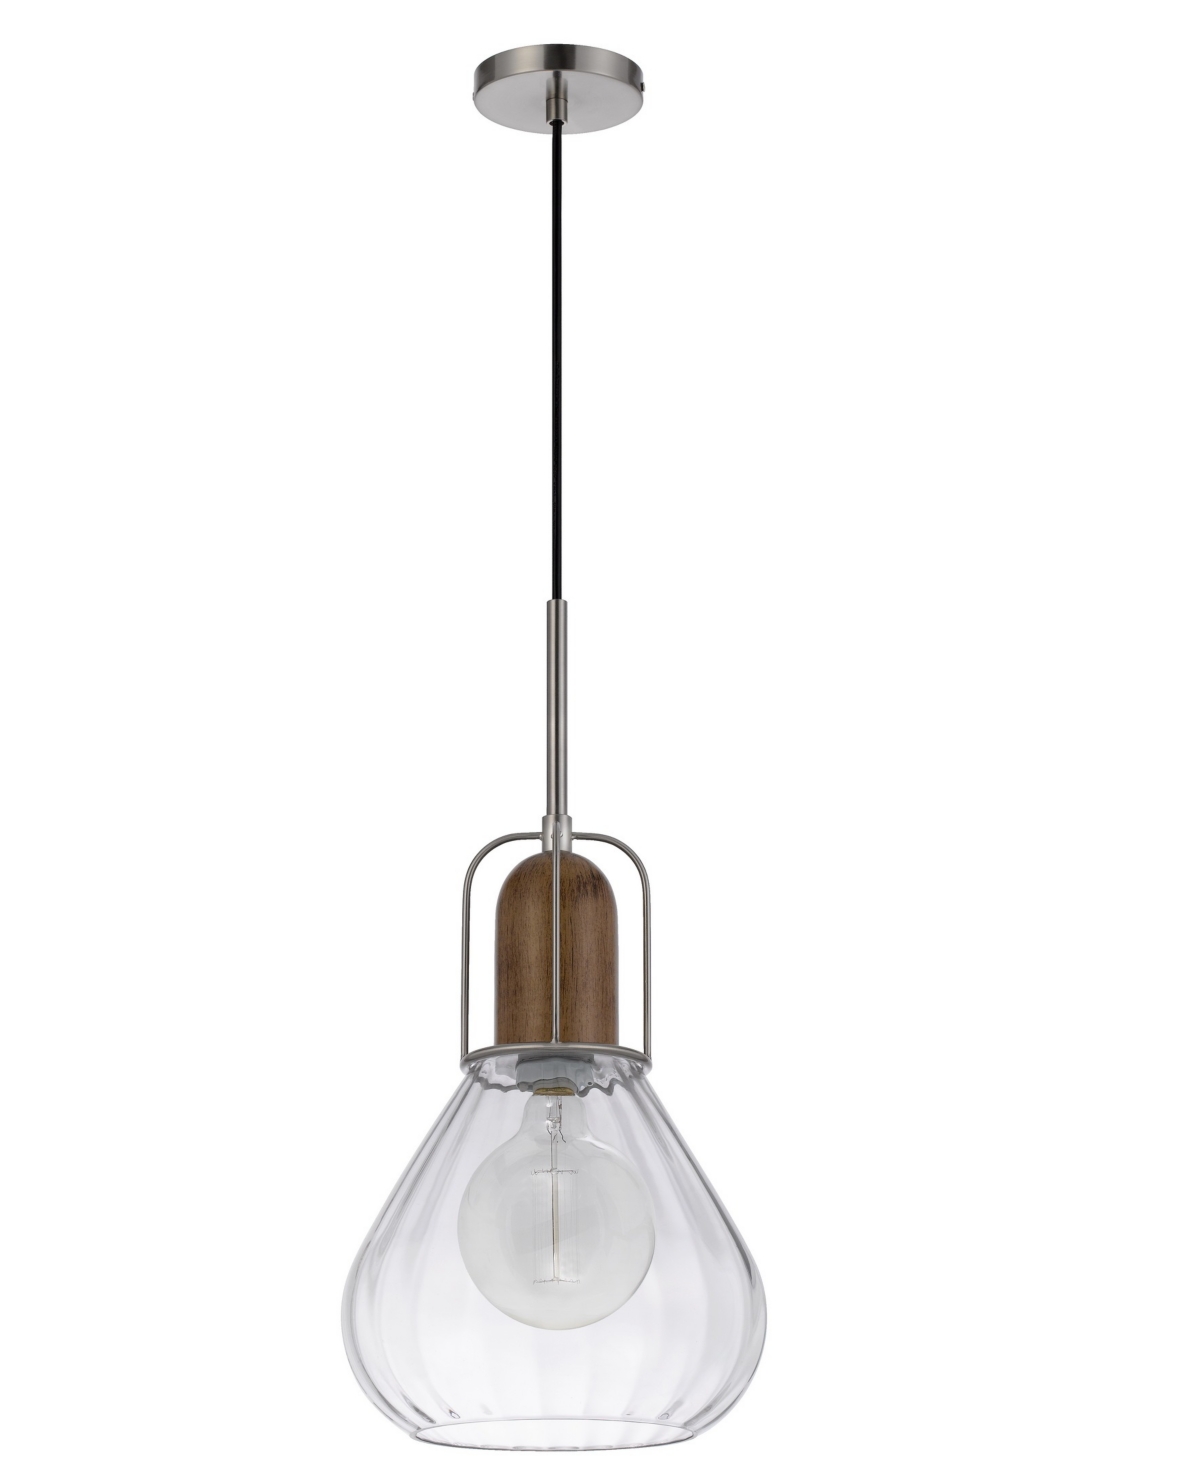 Cal Lighting Rochelle 22" Height Metal And Wood Pendant In Brushed Steel,wood